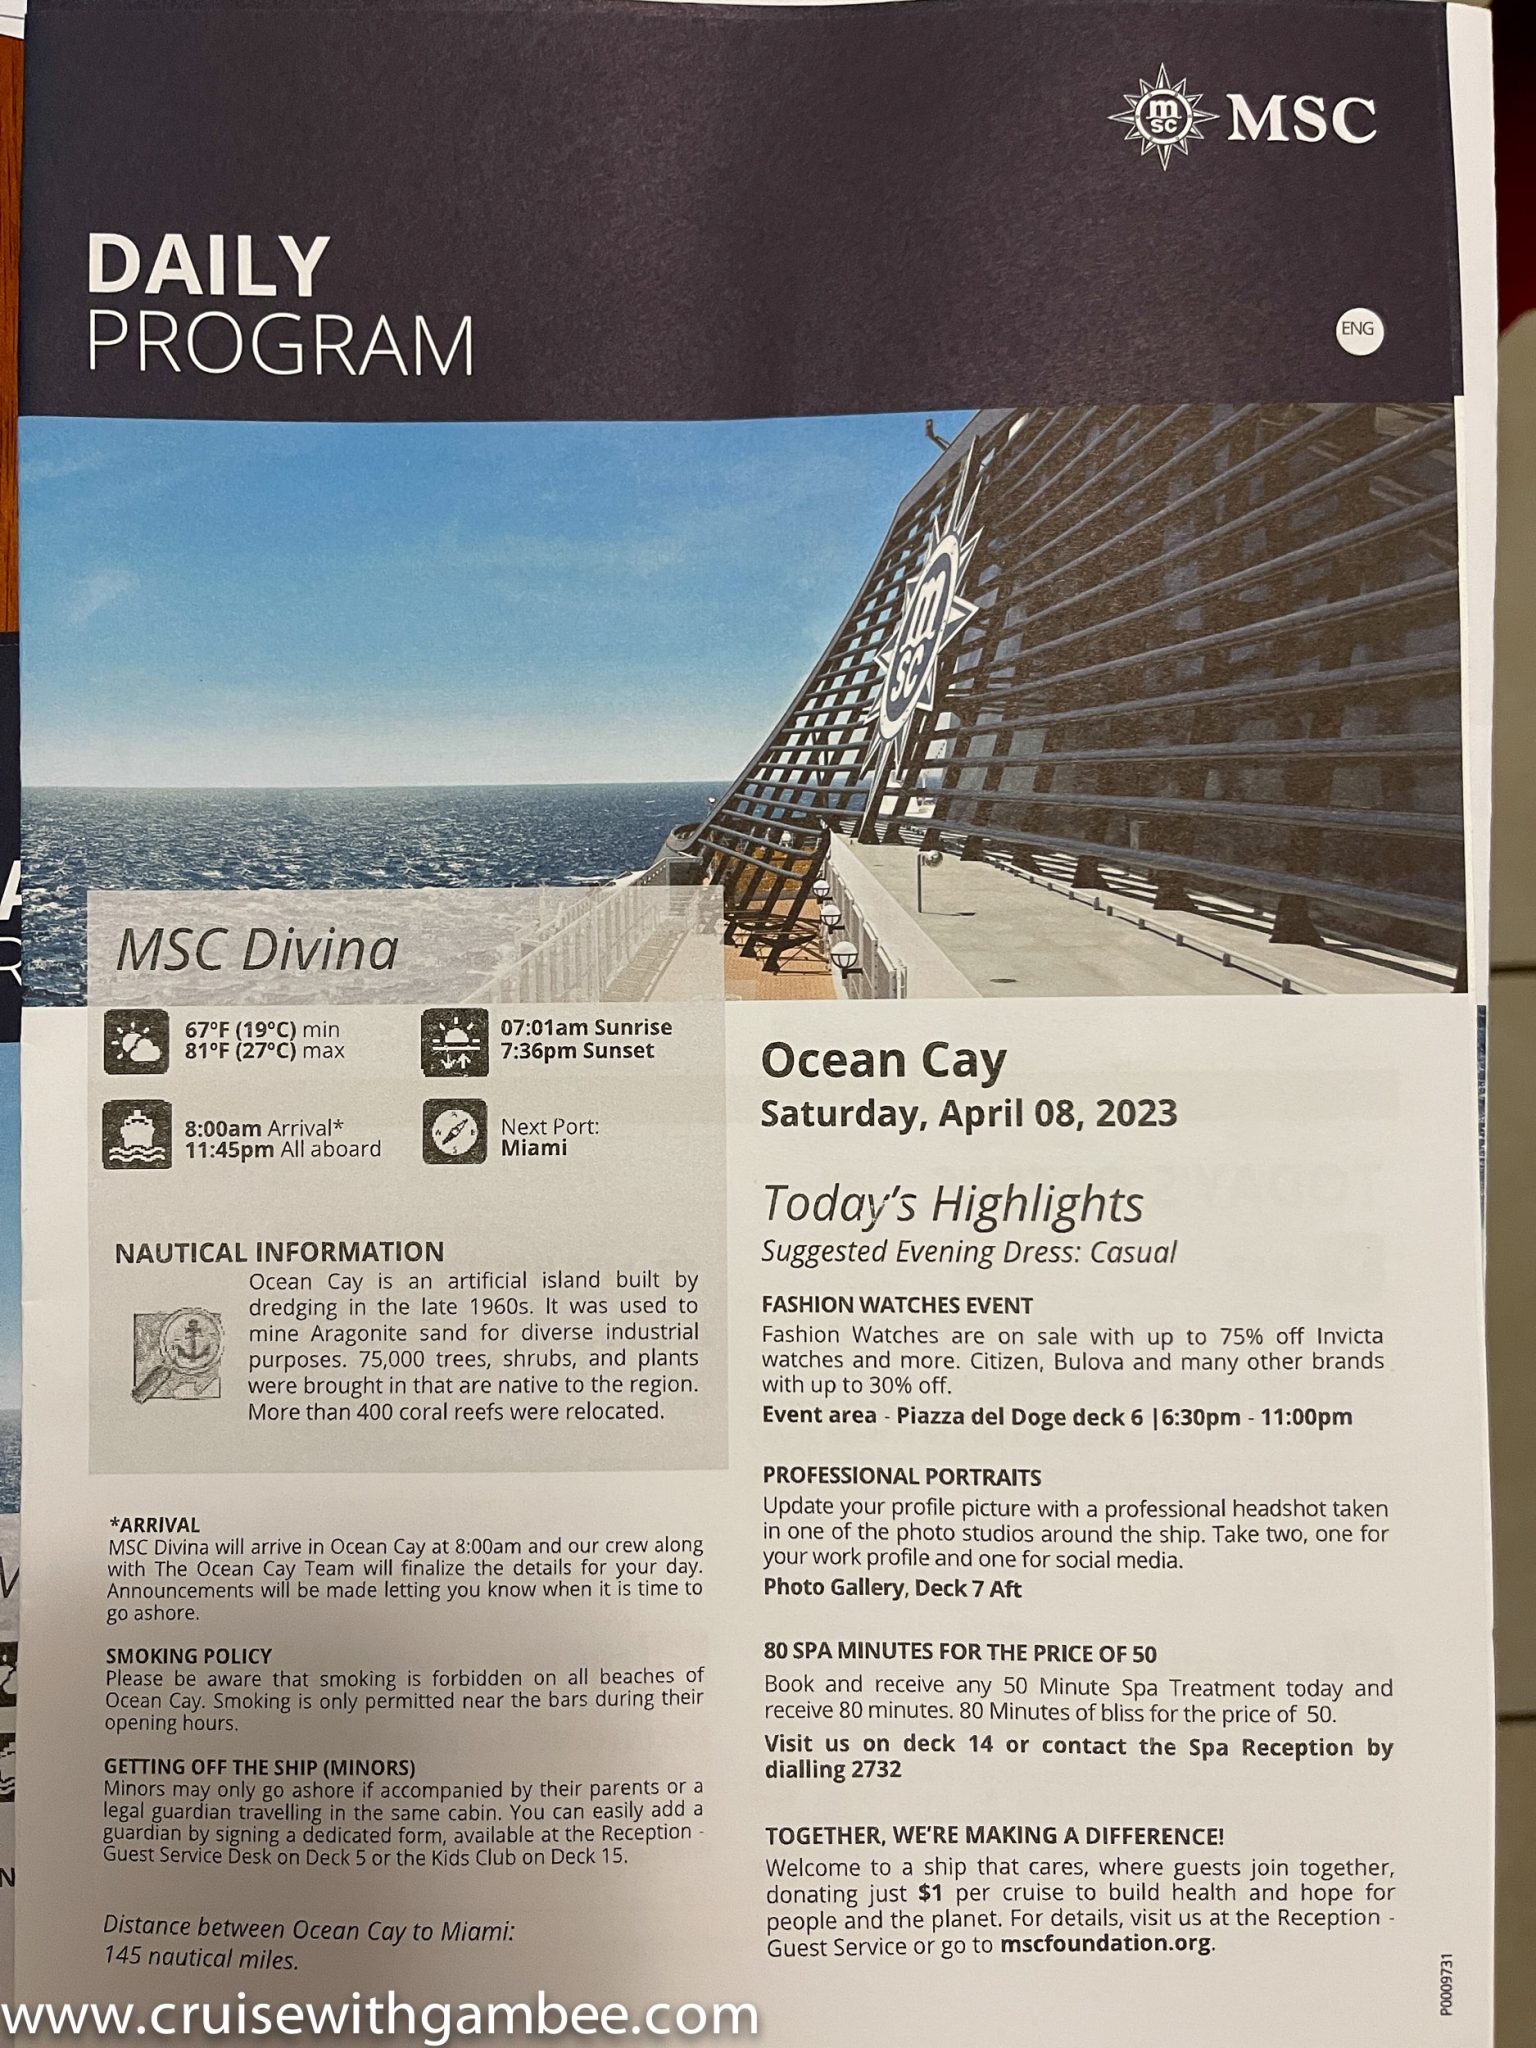 MSC Divina Daily Program cruise with gambee